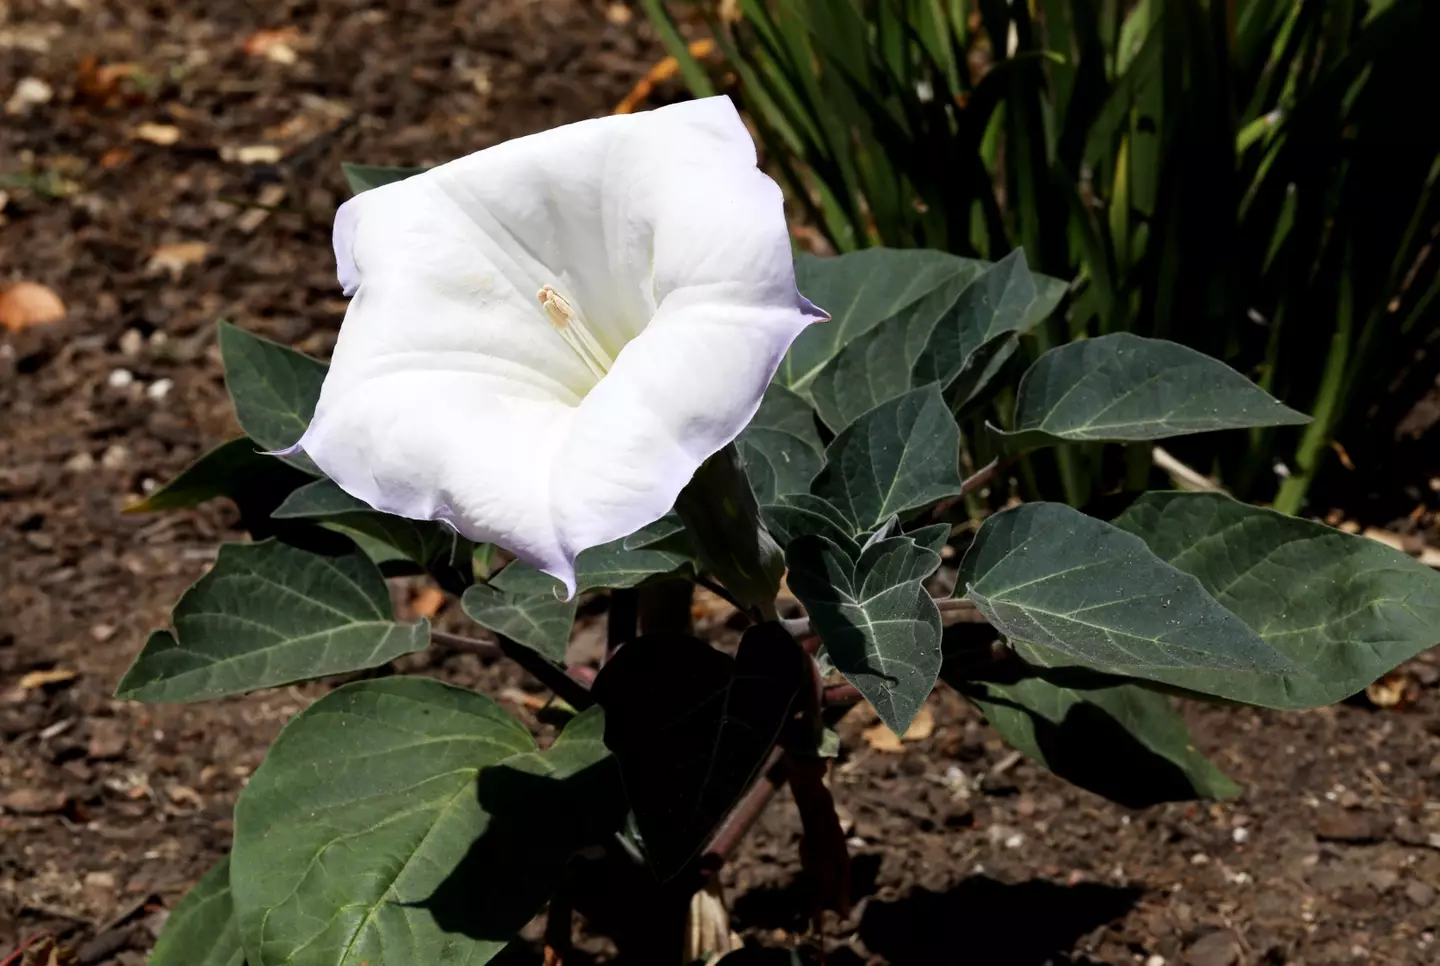 There are various species of datura.